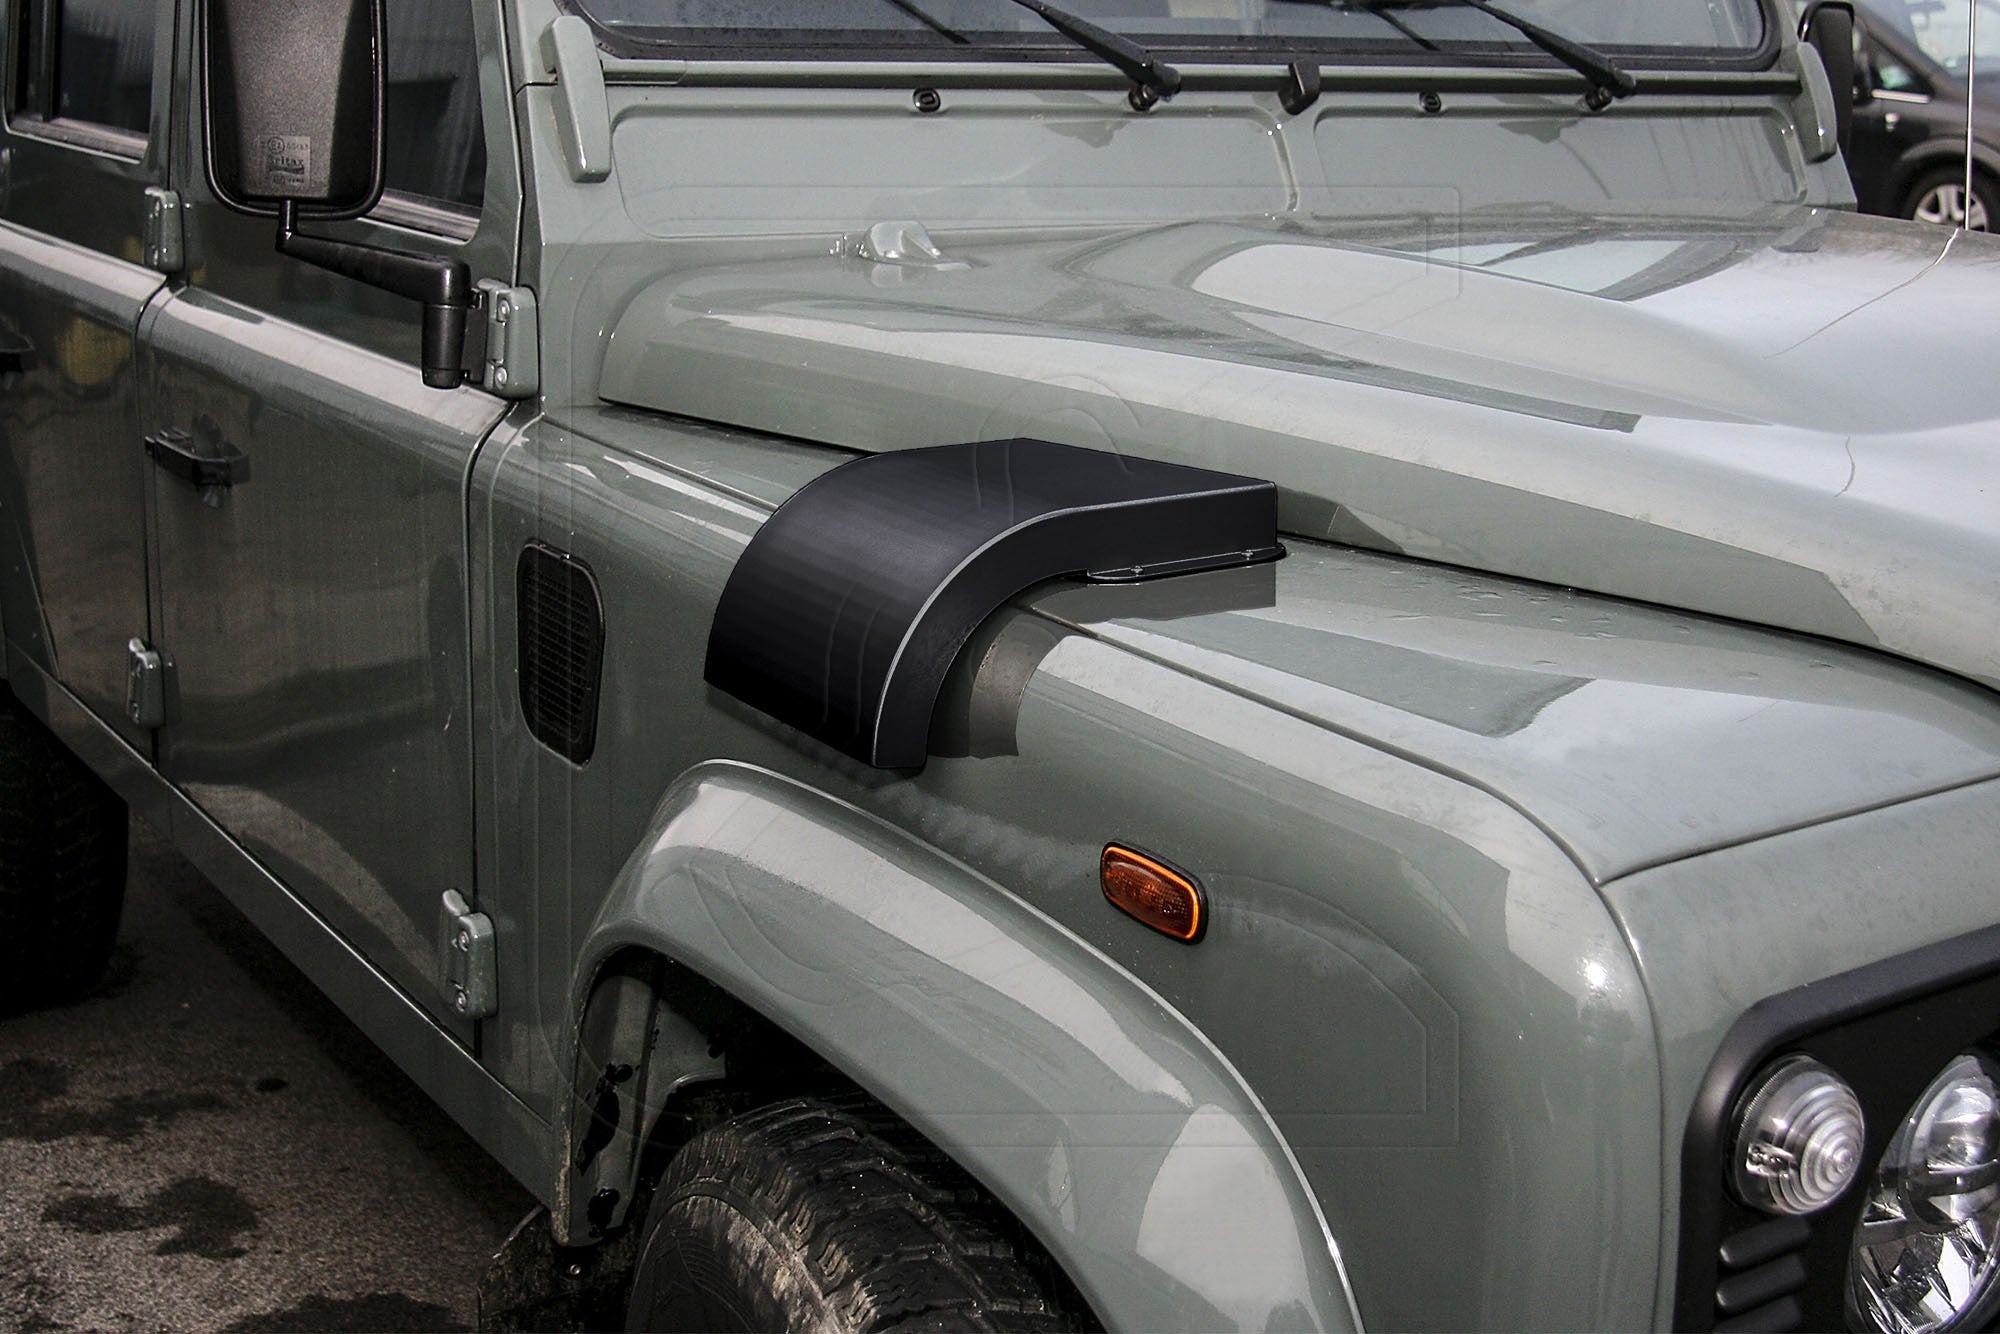 Defender Military Snow Cowl Cover - for Land Rover Defender 90/110/130 (stainless steel)